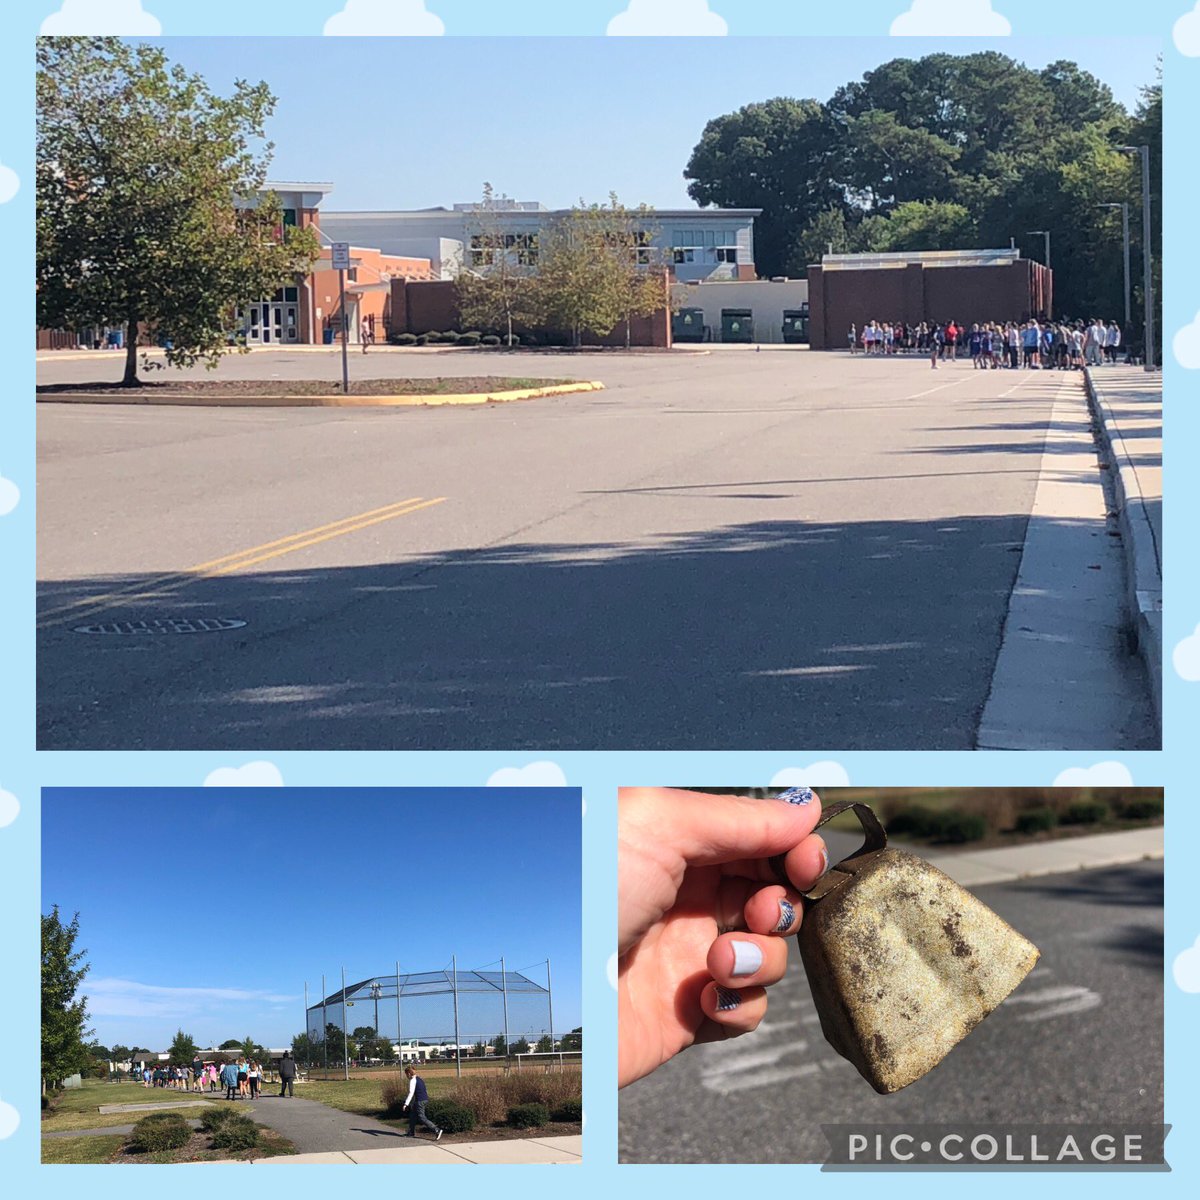 It couldn’t be a more perfect day for the extra-long run @BrickellAcademy with azure blue skies, warm weather, and lots of staff participating and cheering on the students! #HoneygroveFamily #oneschool